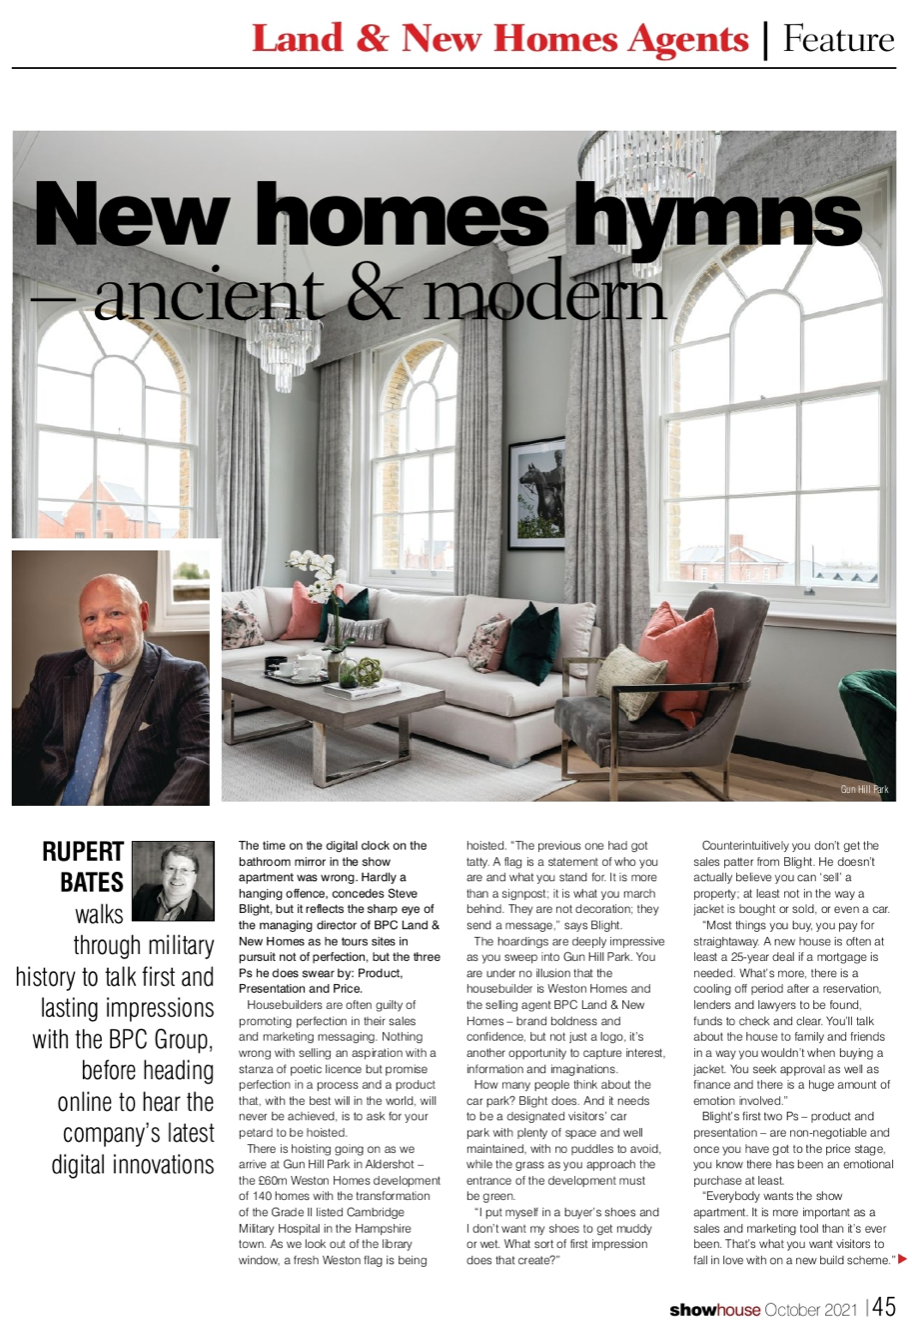 New Homes Hymns - ancient and modern image